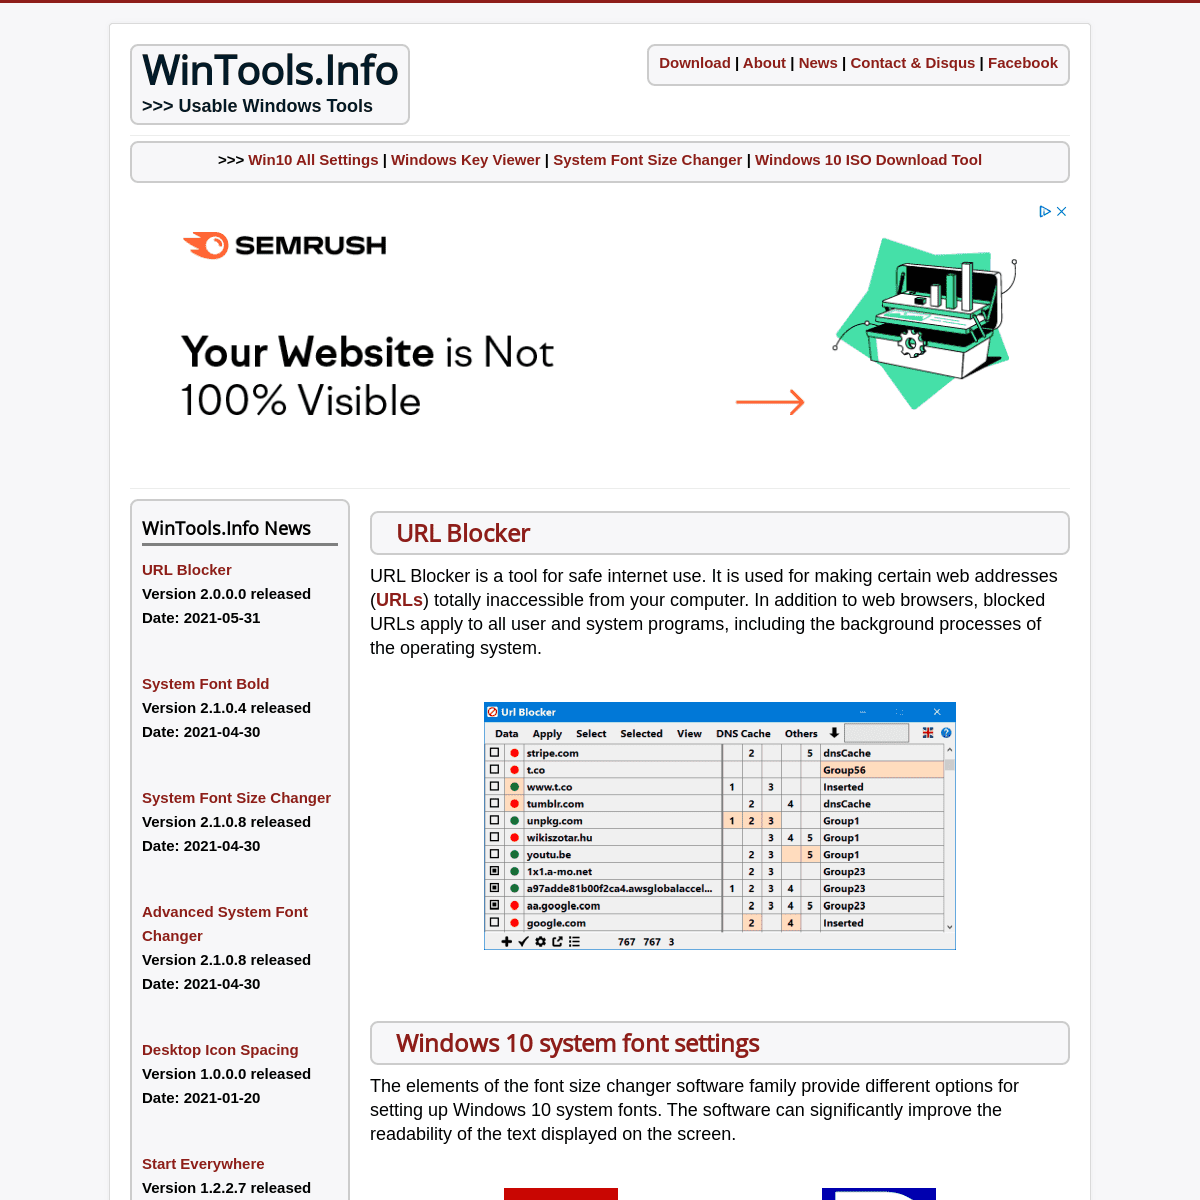 A complete backup of https://wintools.info